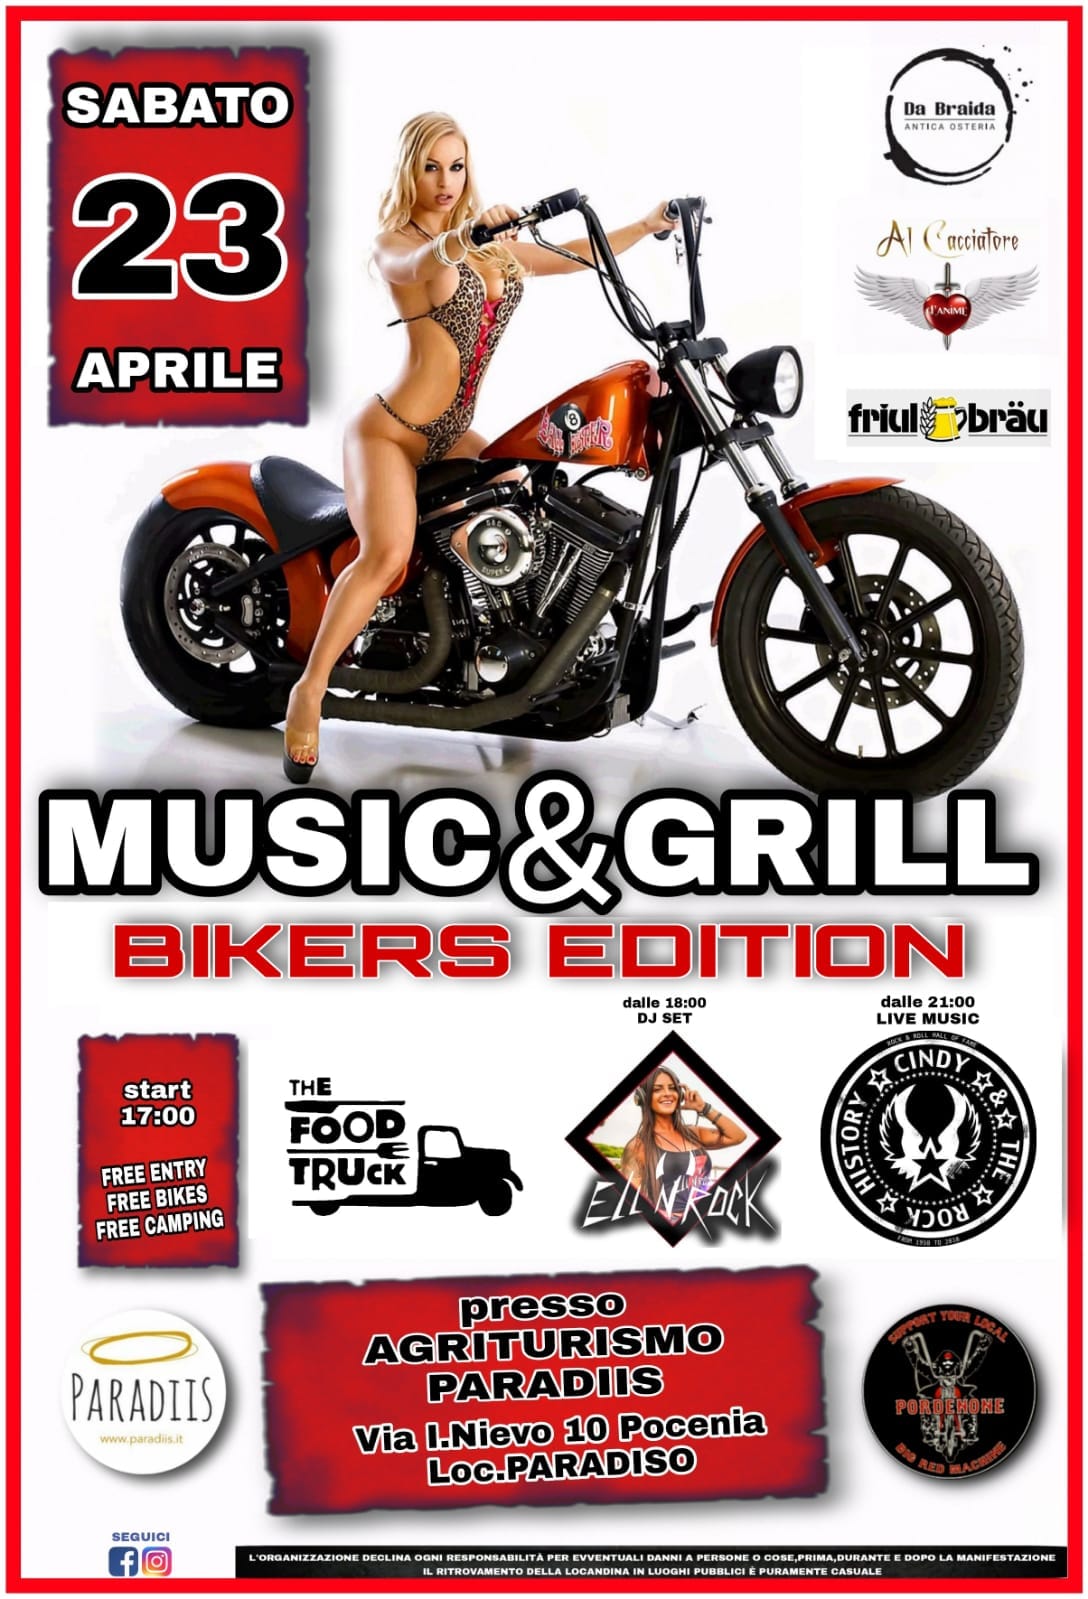 Music & Grill BIKERS EDITION